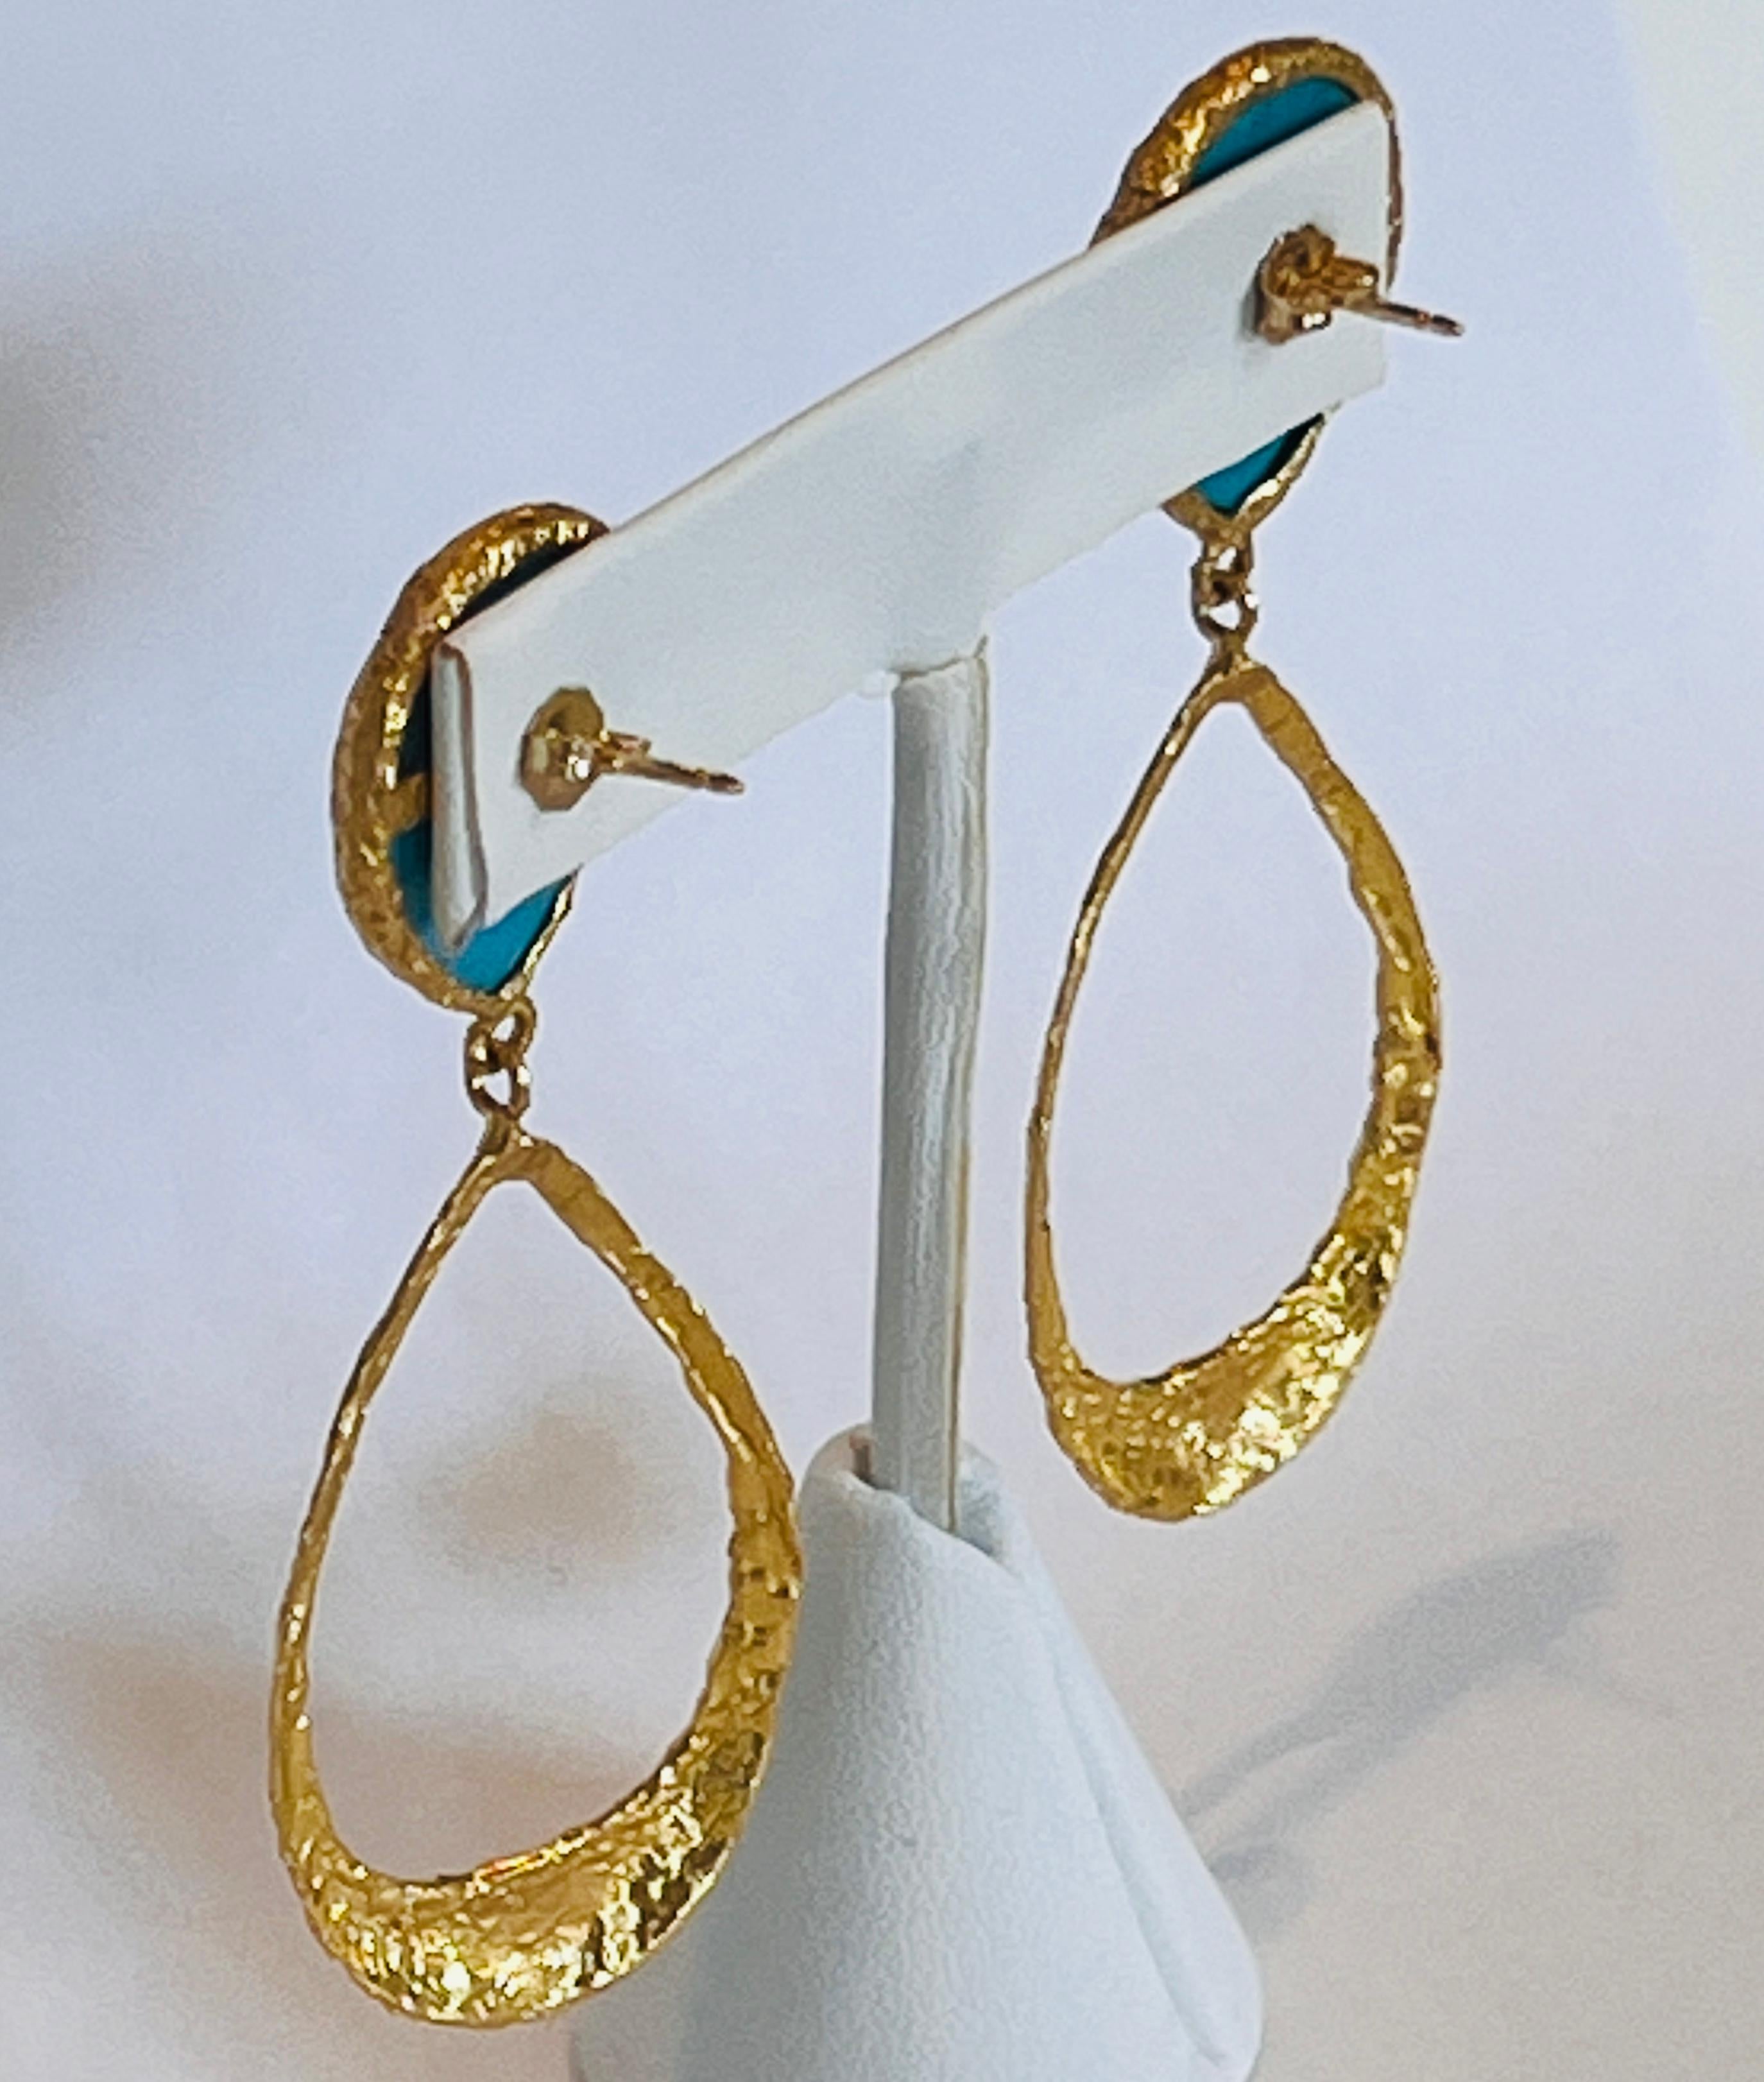 Tagili Signature Teardrop Earrings with Turquoise in 22k Gold For Sale 1